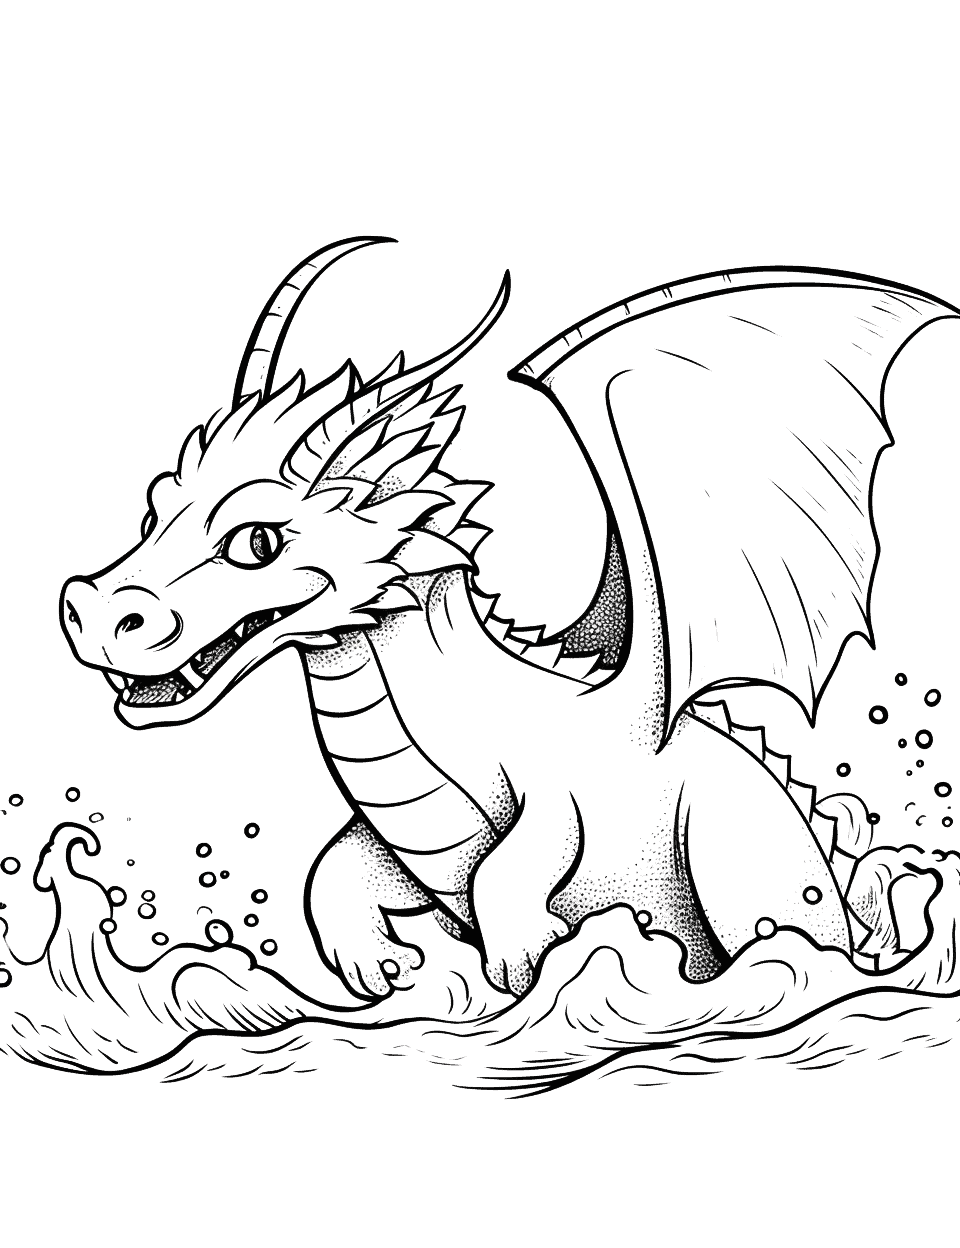 Seawing Dragon Dive Coloring Page - A Seawing dragon diving into the ocean with a splash.